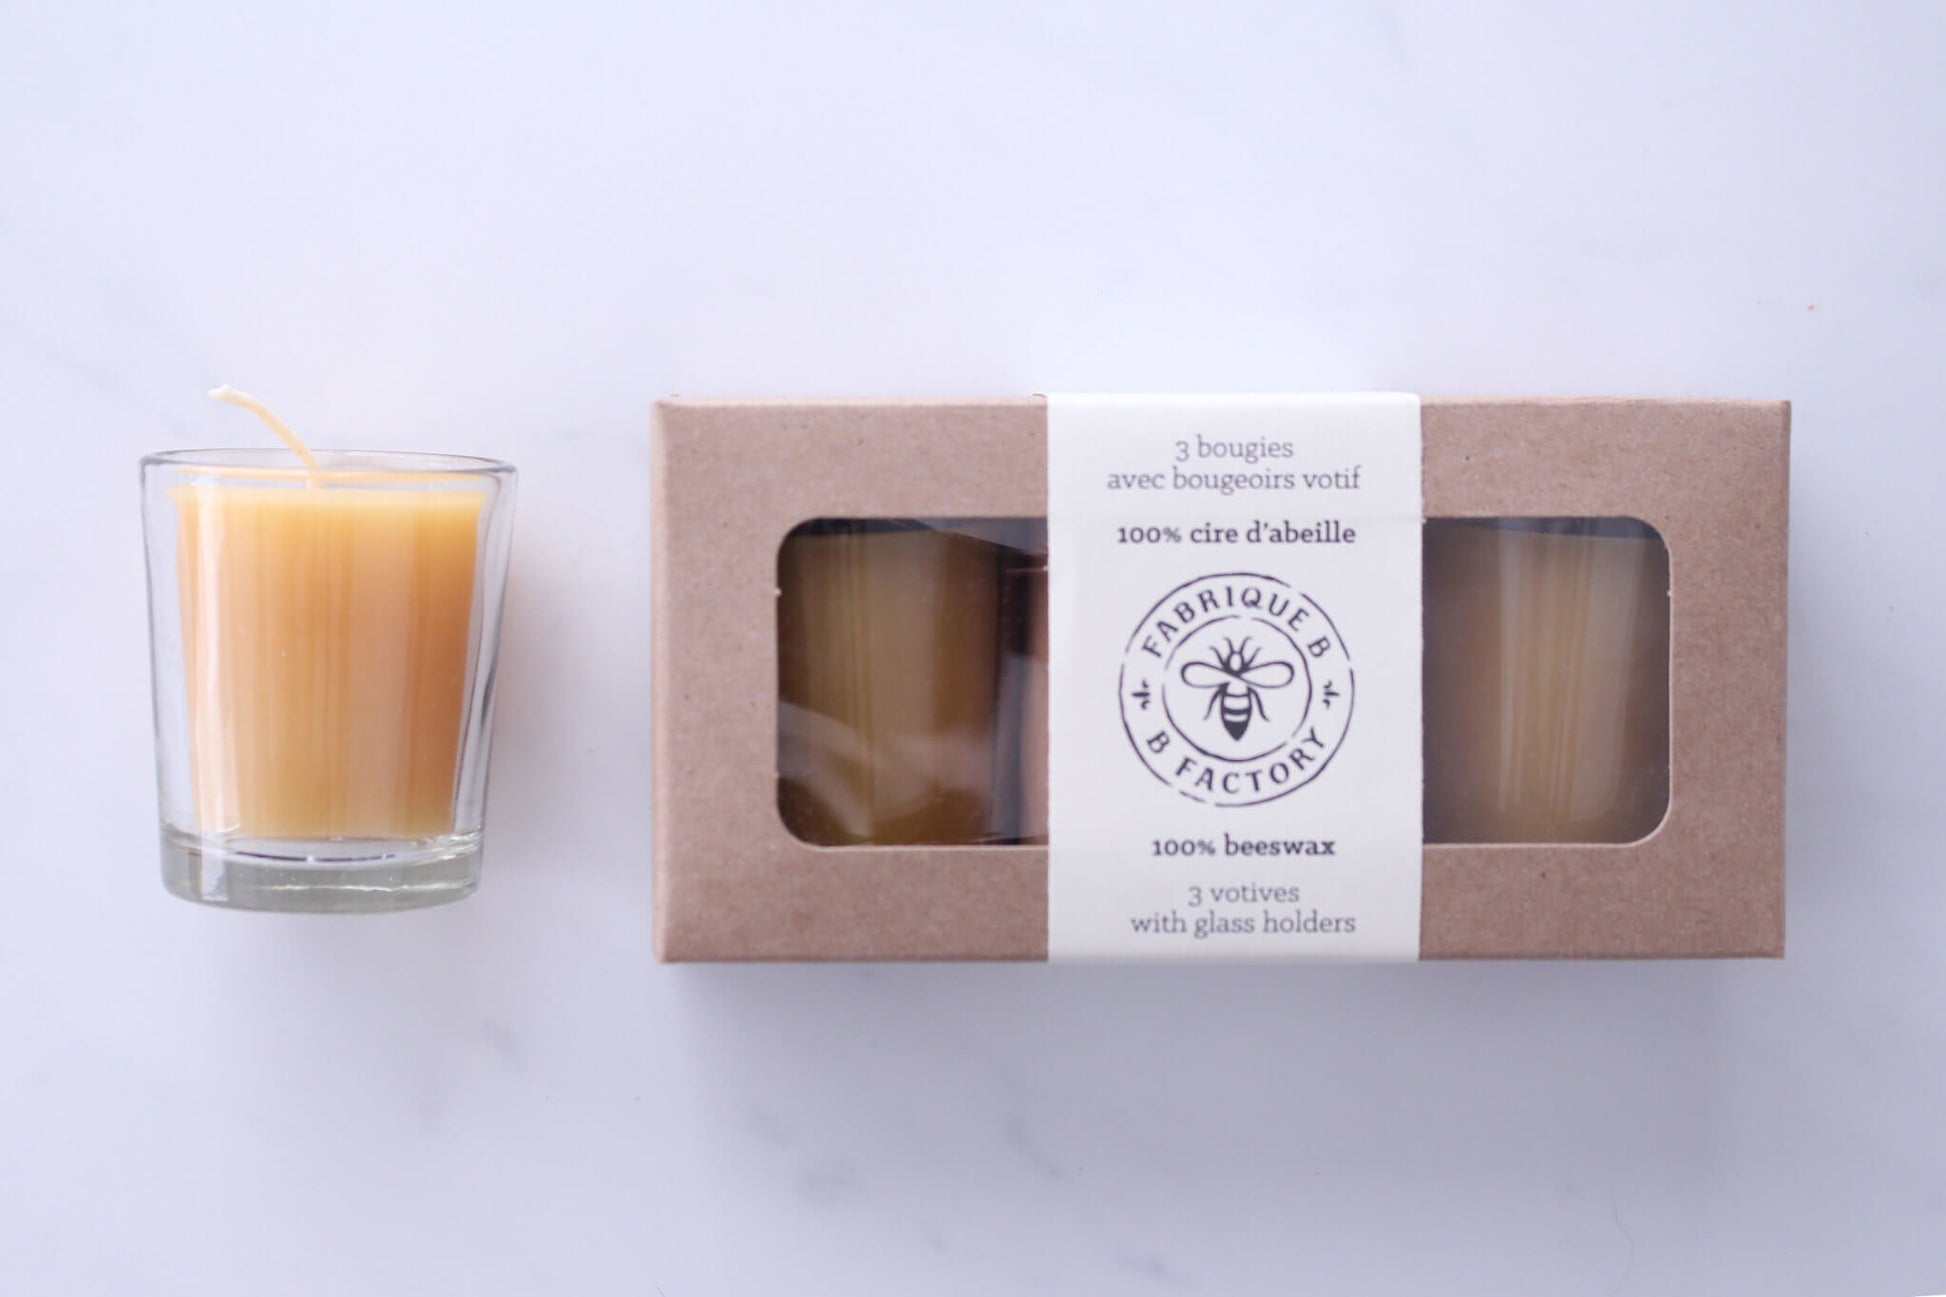 Beeswax votive candle in clear glass holder next to 3 pure beeswax votive candles in gift box with B Factory logo on lid